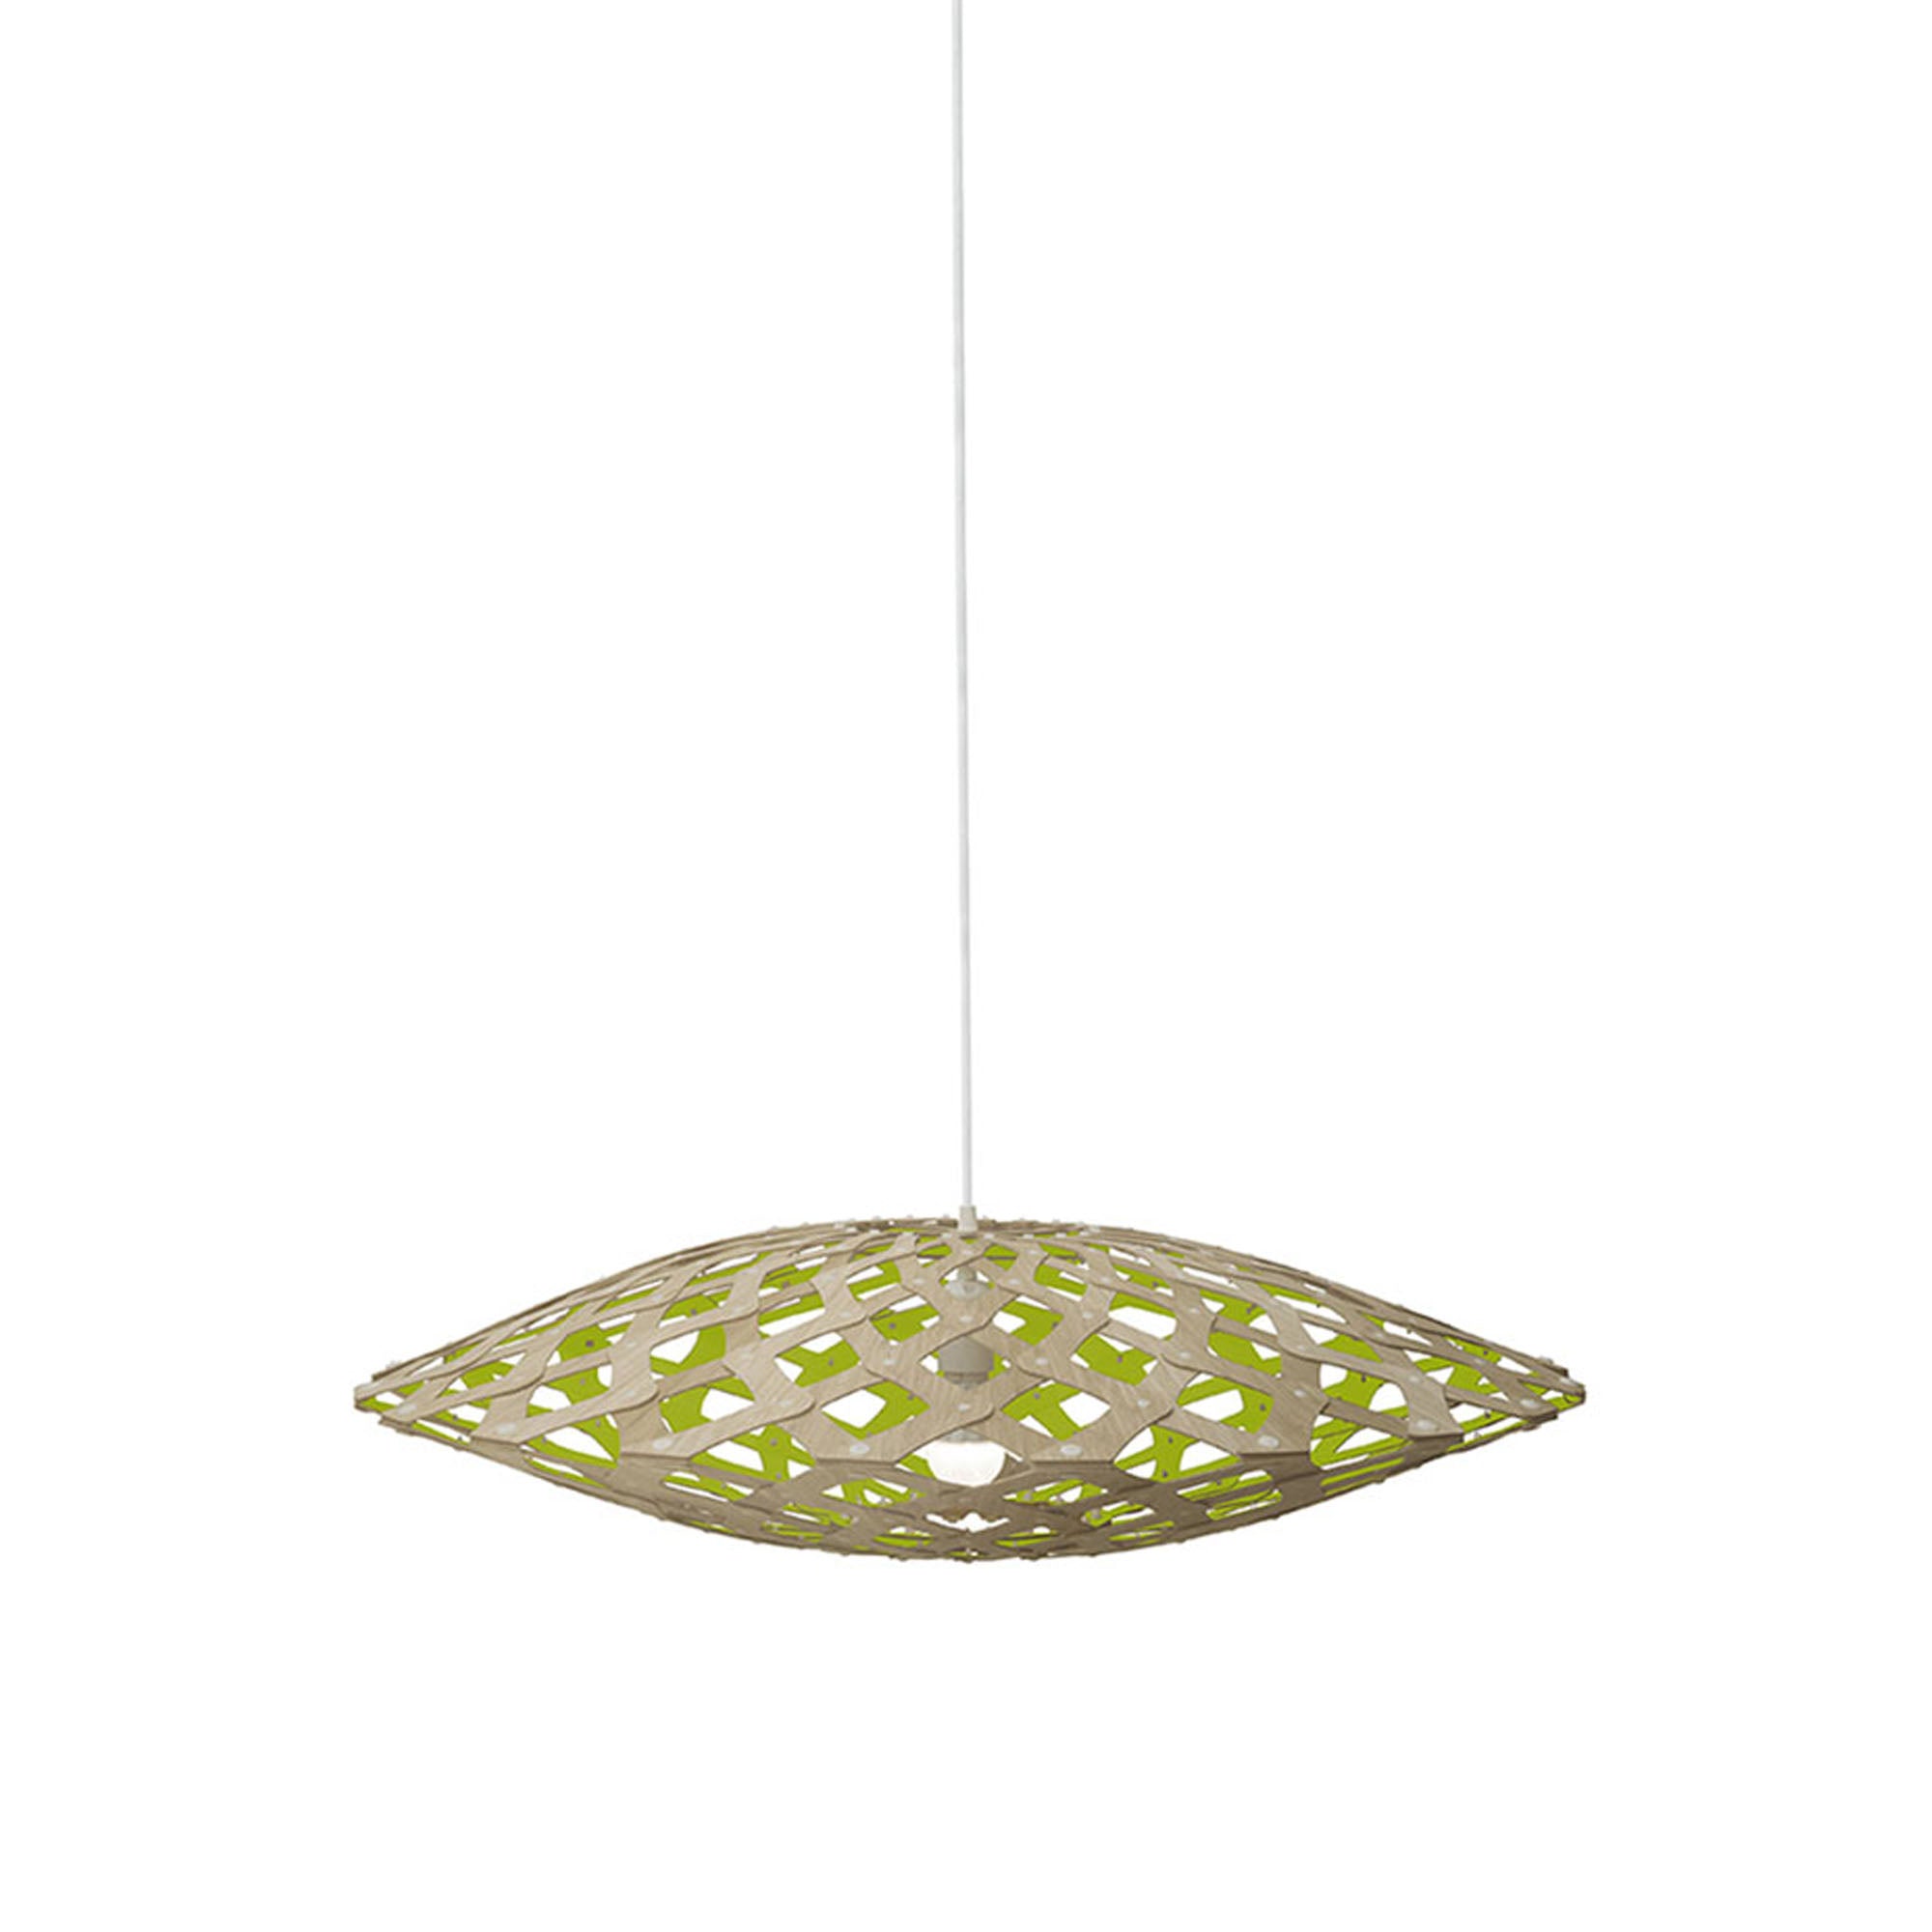 Flax Pendant Light: Small + Bamboo + Lime + White